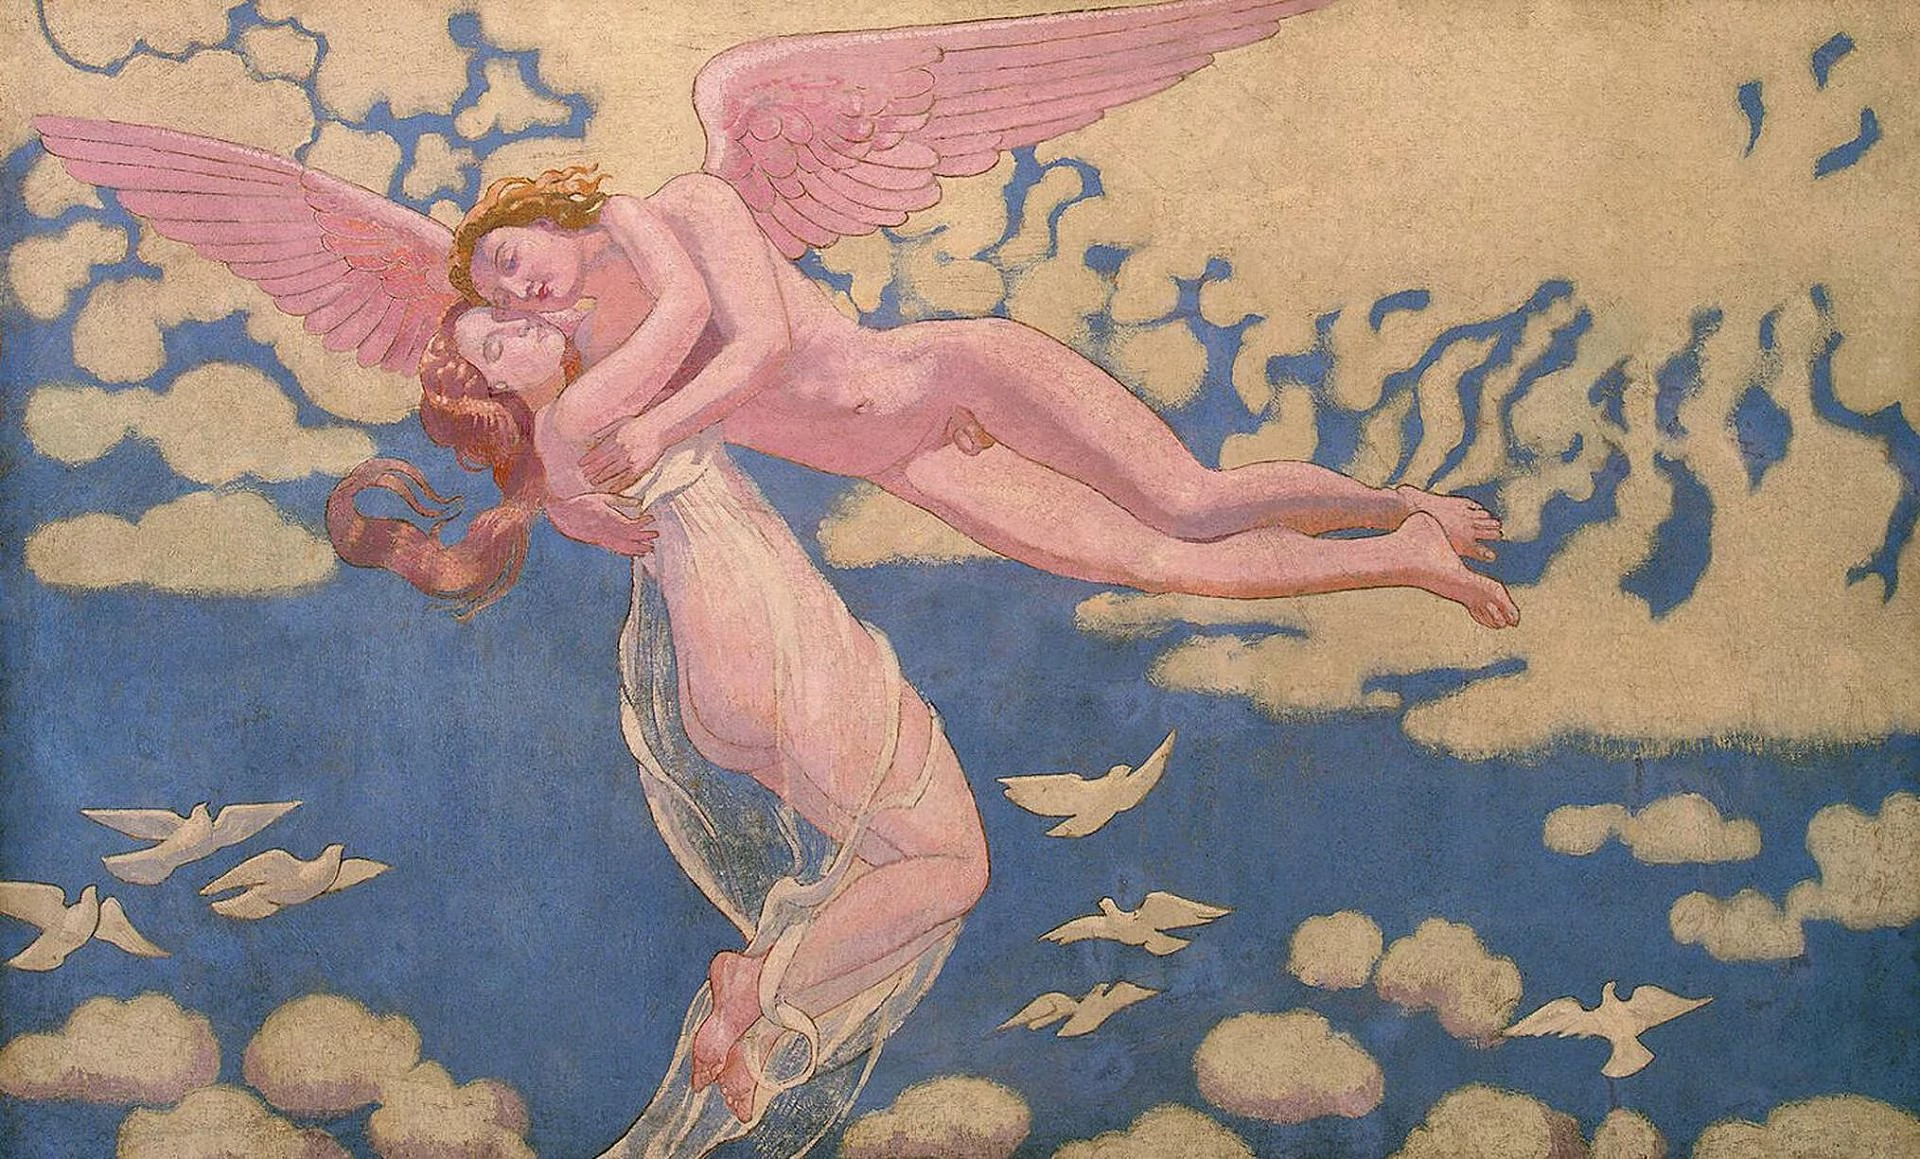 Psyche Panel 7 — Cupid Carrying Psyche Up to Heaven, Maurice Denis